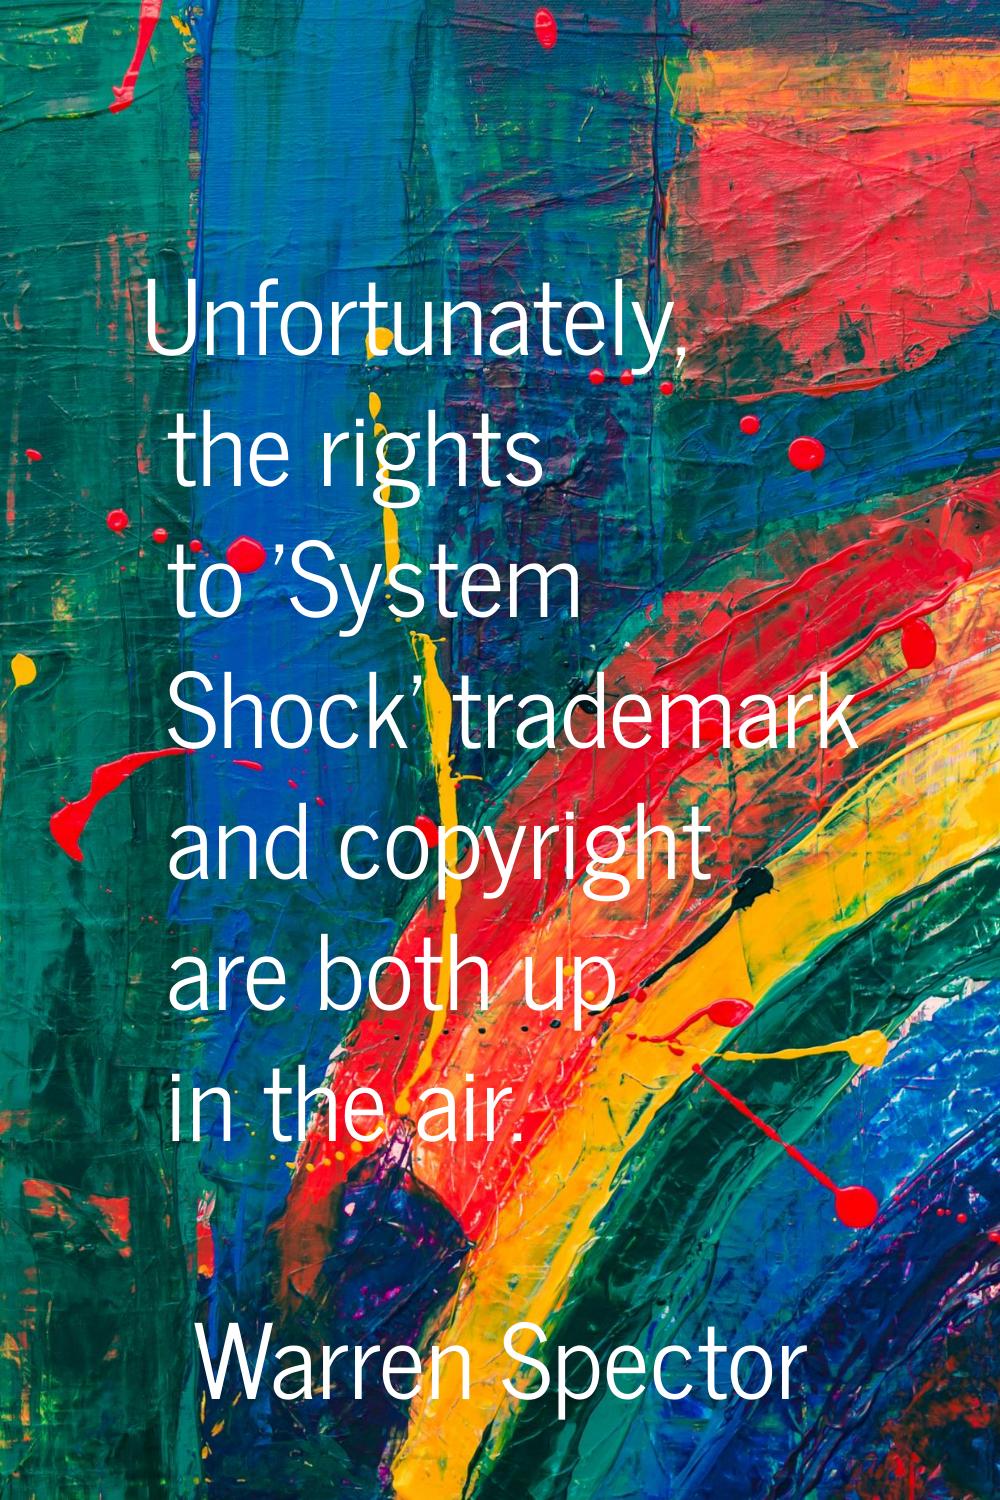 Unfortunately, the rights to 'System Shock' trademark and copyright are both up in the air.